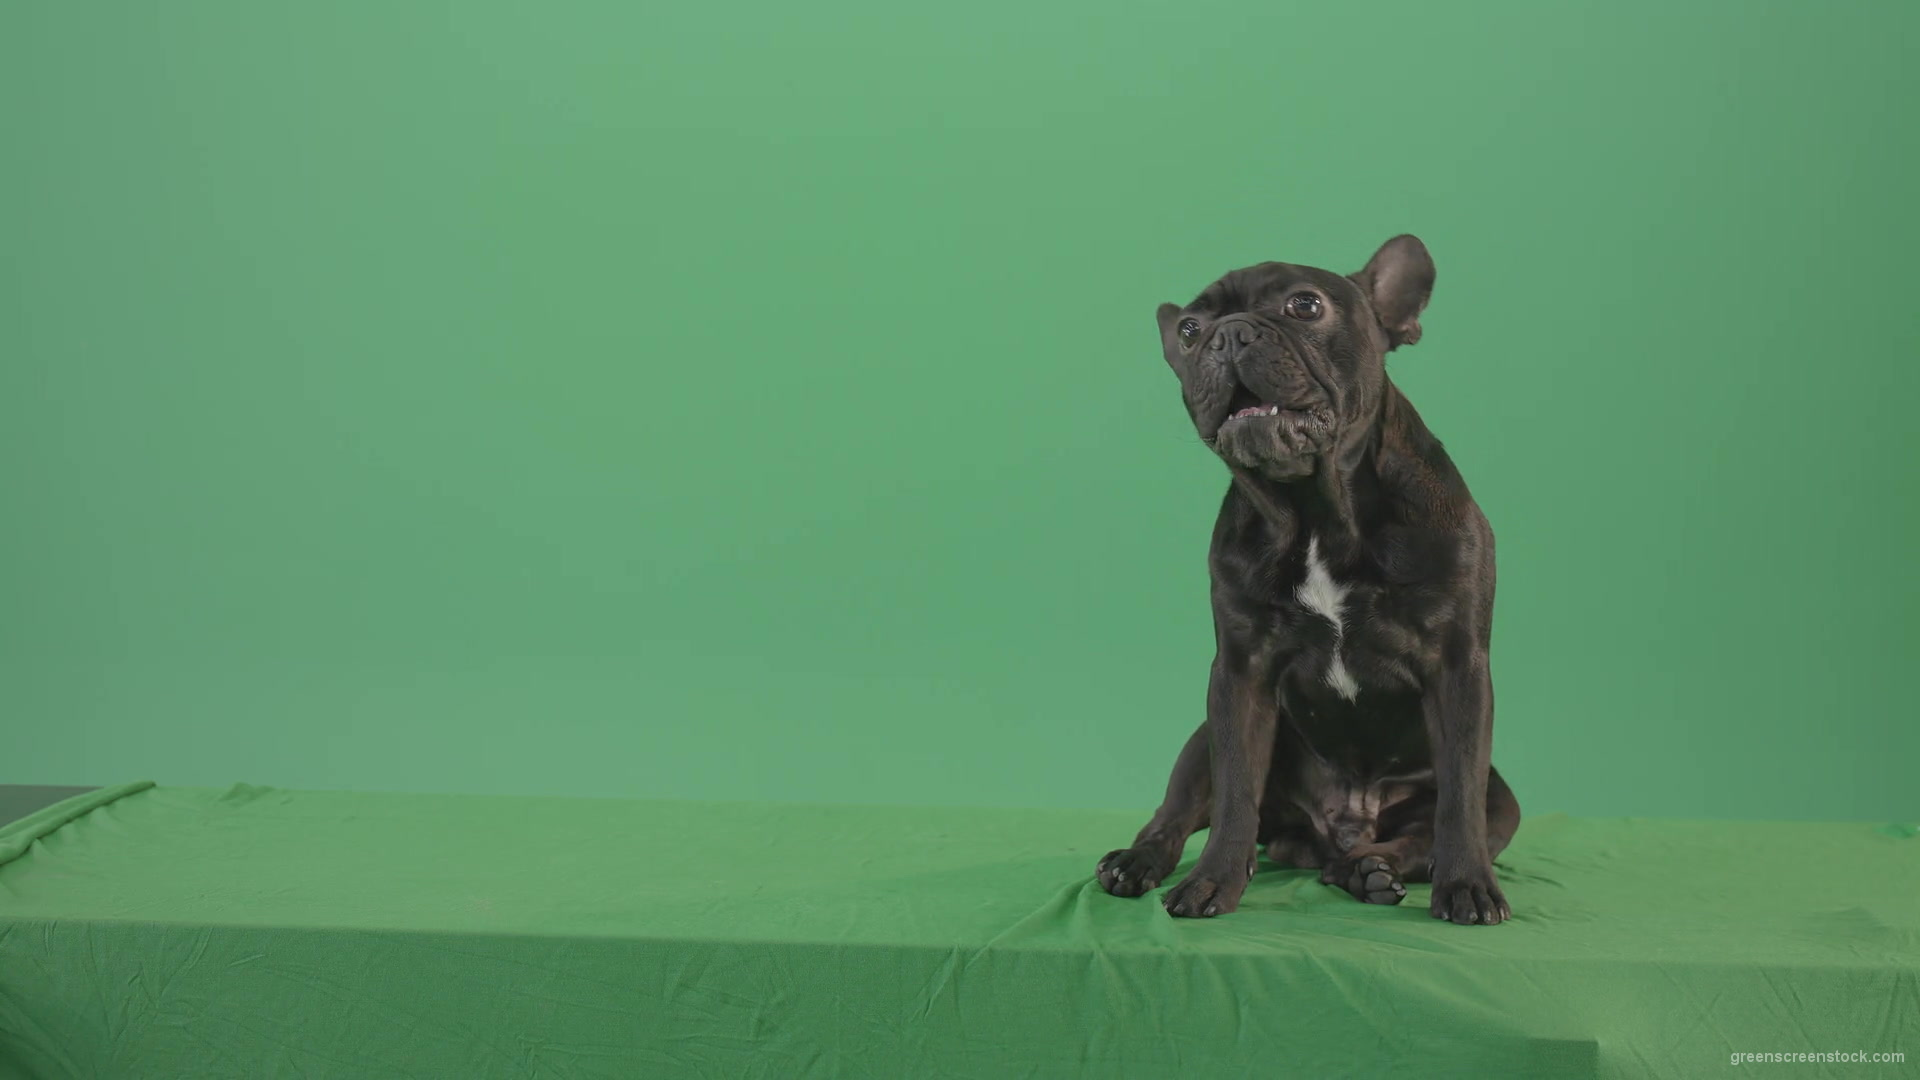 French-bulldog-in-sitting-pose-barking-isolated-on-green-screen-4K-Video-Footage-1920_007 Green Screen Stock